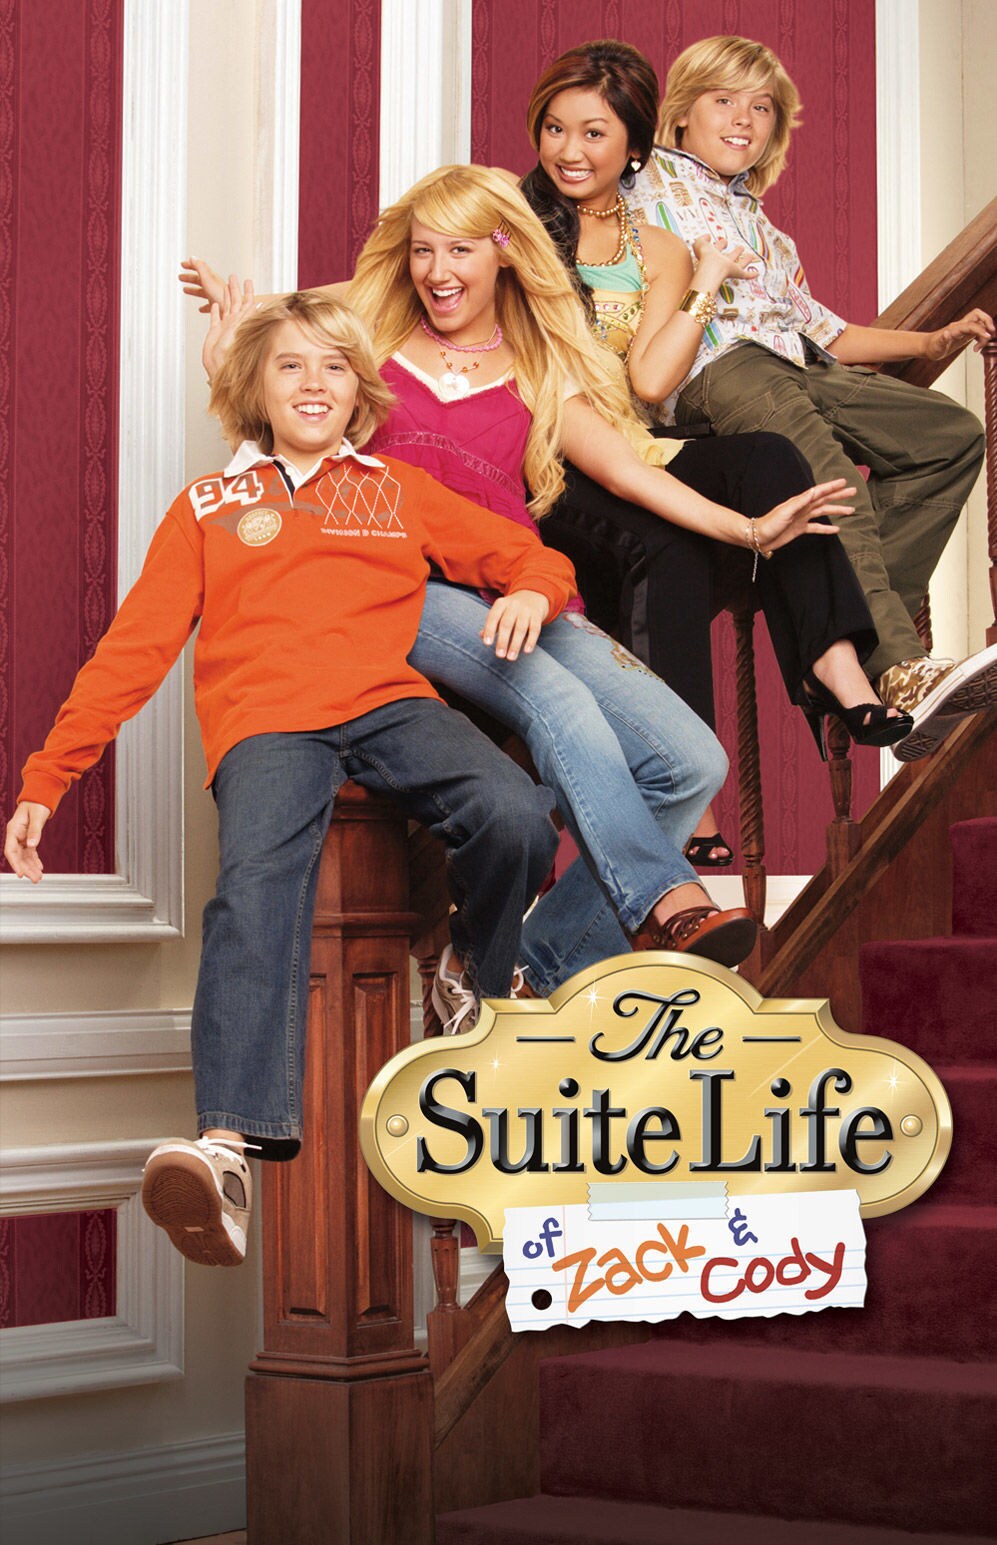 Suite life of zack and cody conga line games